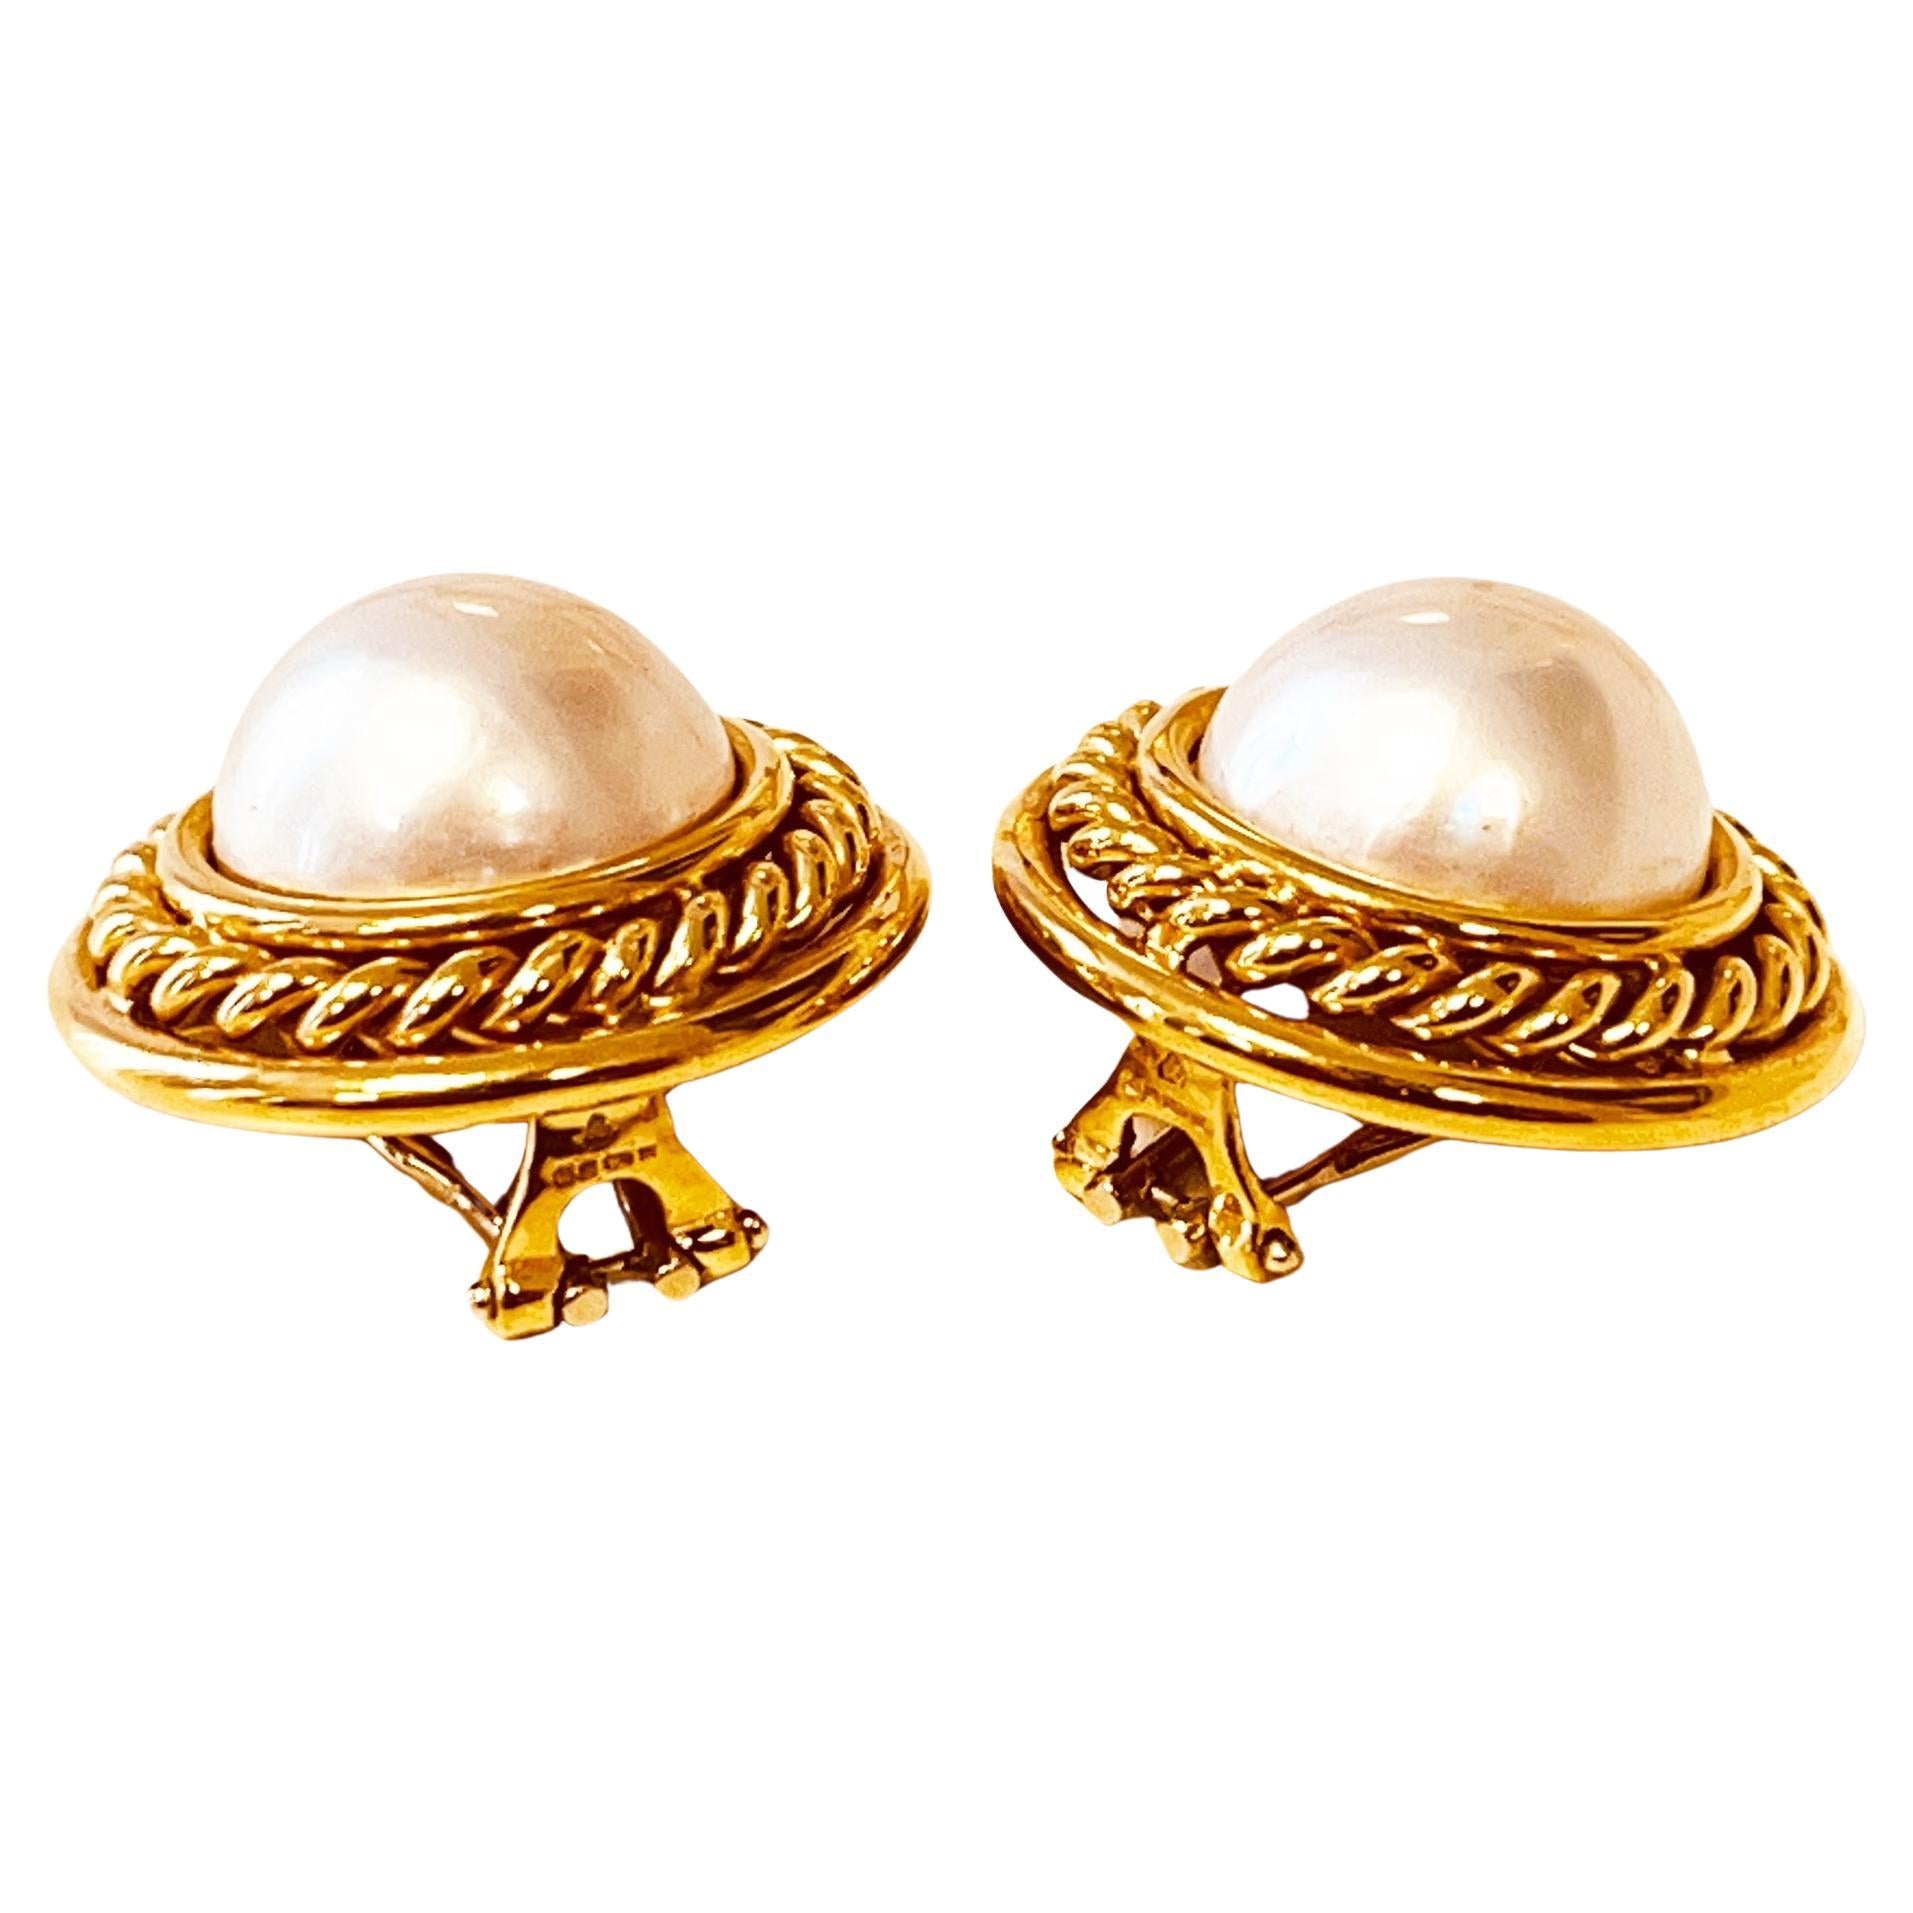 A Pair of 18ct Gold Mabe' Pearl Earclips. Circa 1980's. Made in England